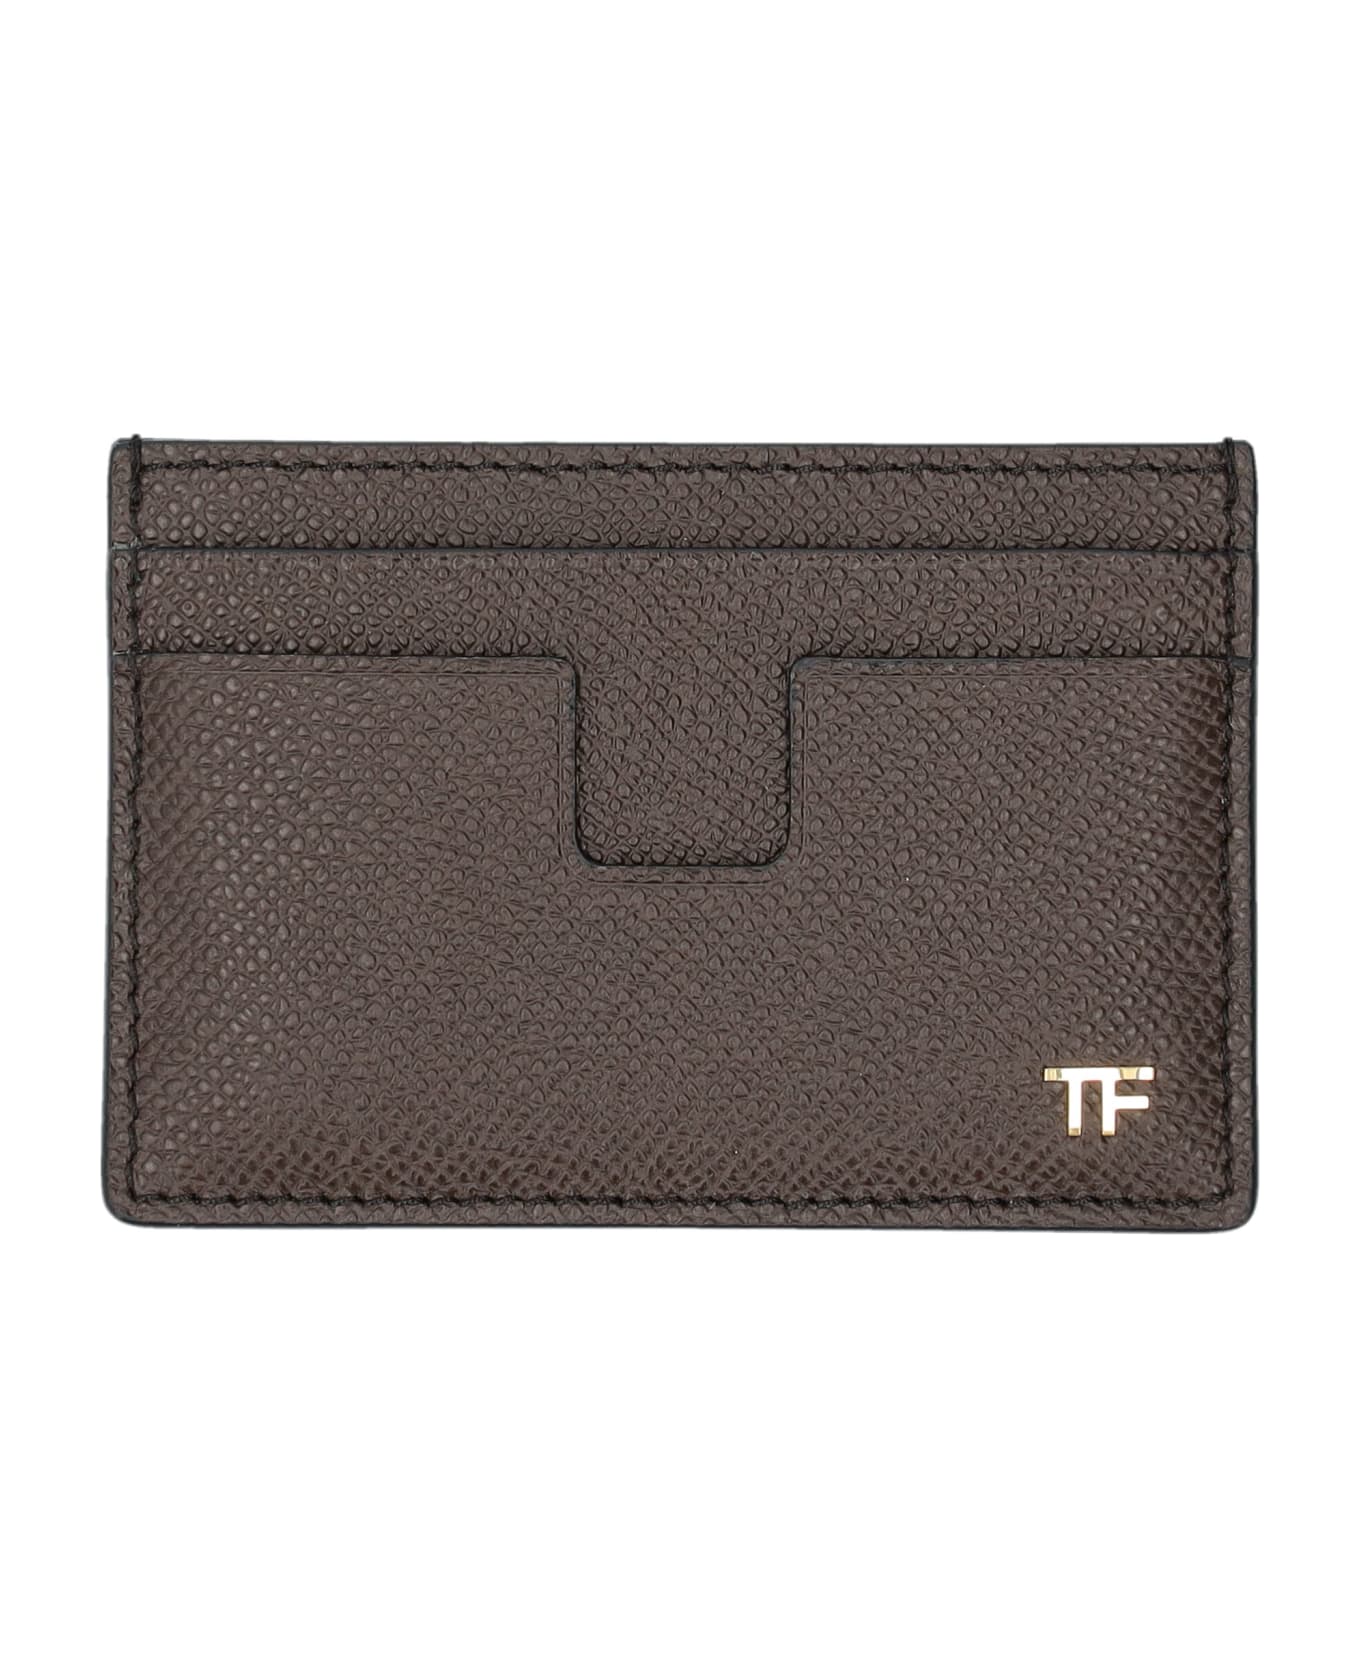 Tom Ford Small Grain Leather Cardholder - CHOCOLATE 財布